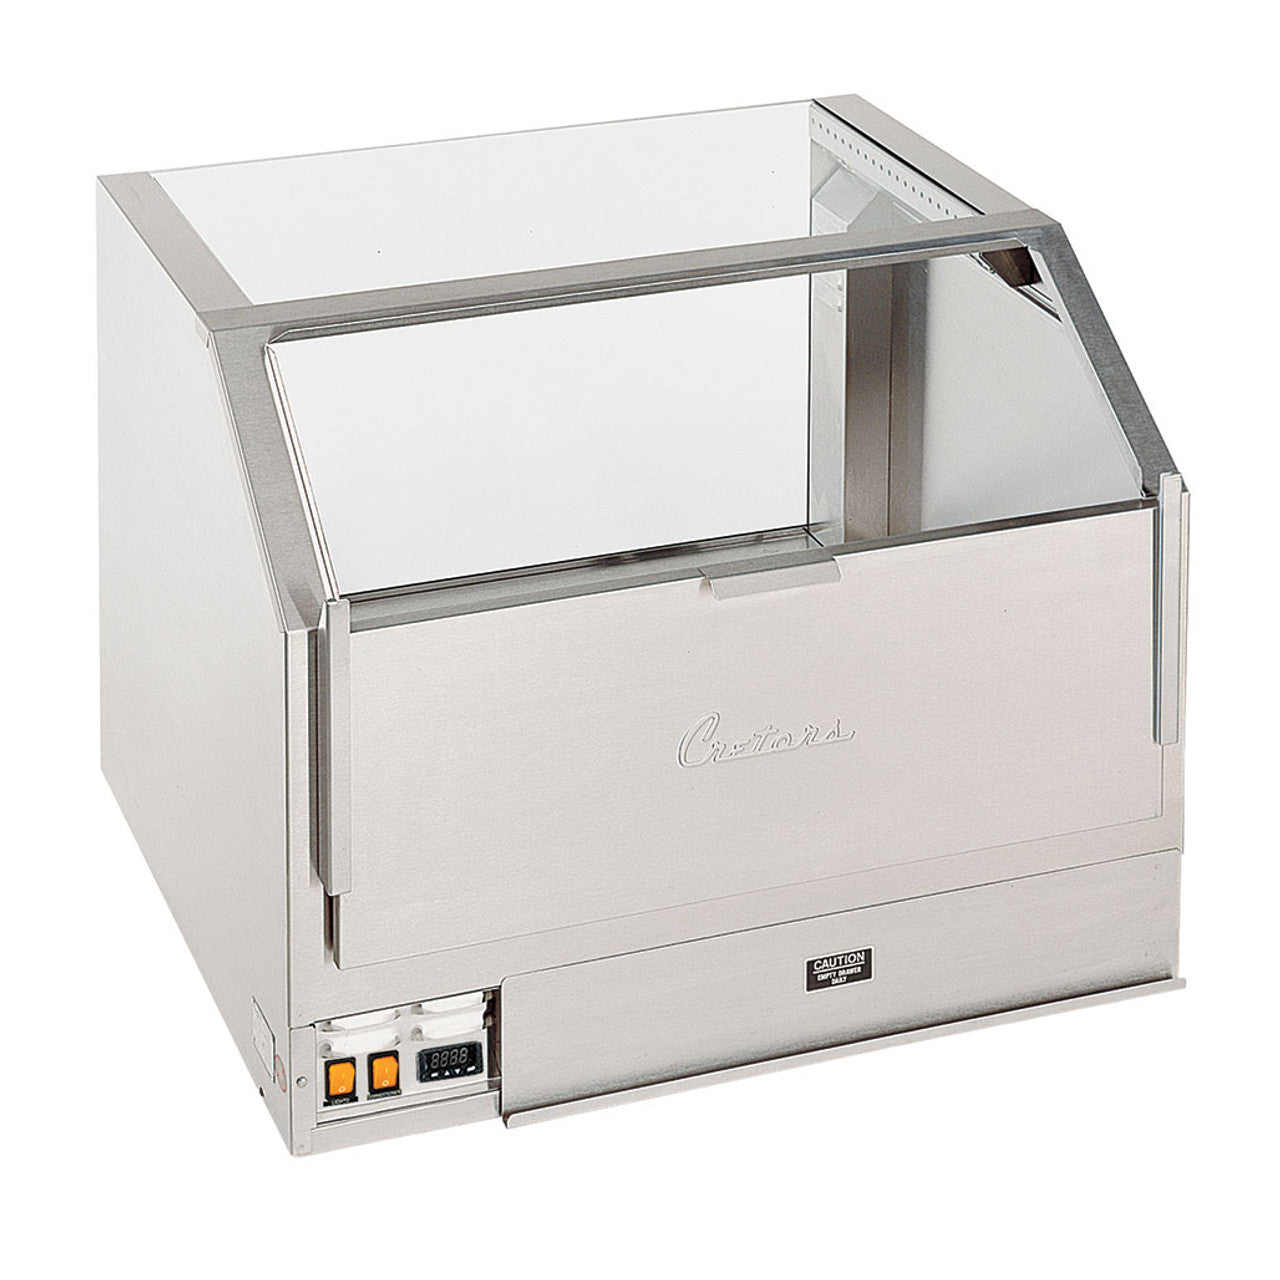 Cretors 36 Counter Showcase Cornditioner Cabinet for storing, displaying and keeping popcorn warm.